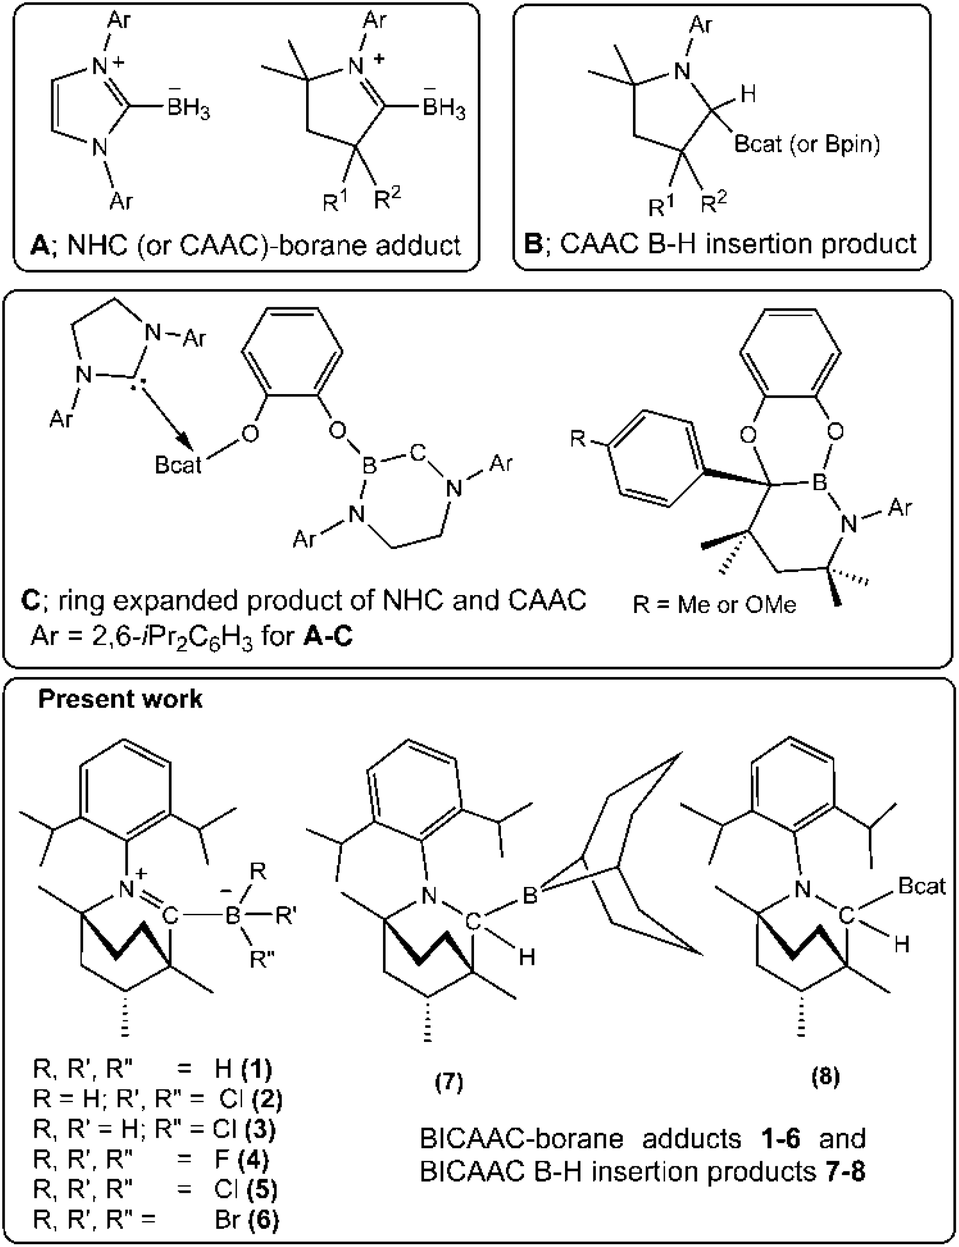 Reactions Of A Bicaac With Hydroboranes Propensity For Lewis Adduct Formation And Carbene Insertion Into The B H Bond Dalton Transactions Rsc Publishing